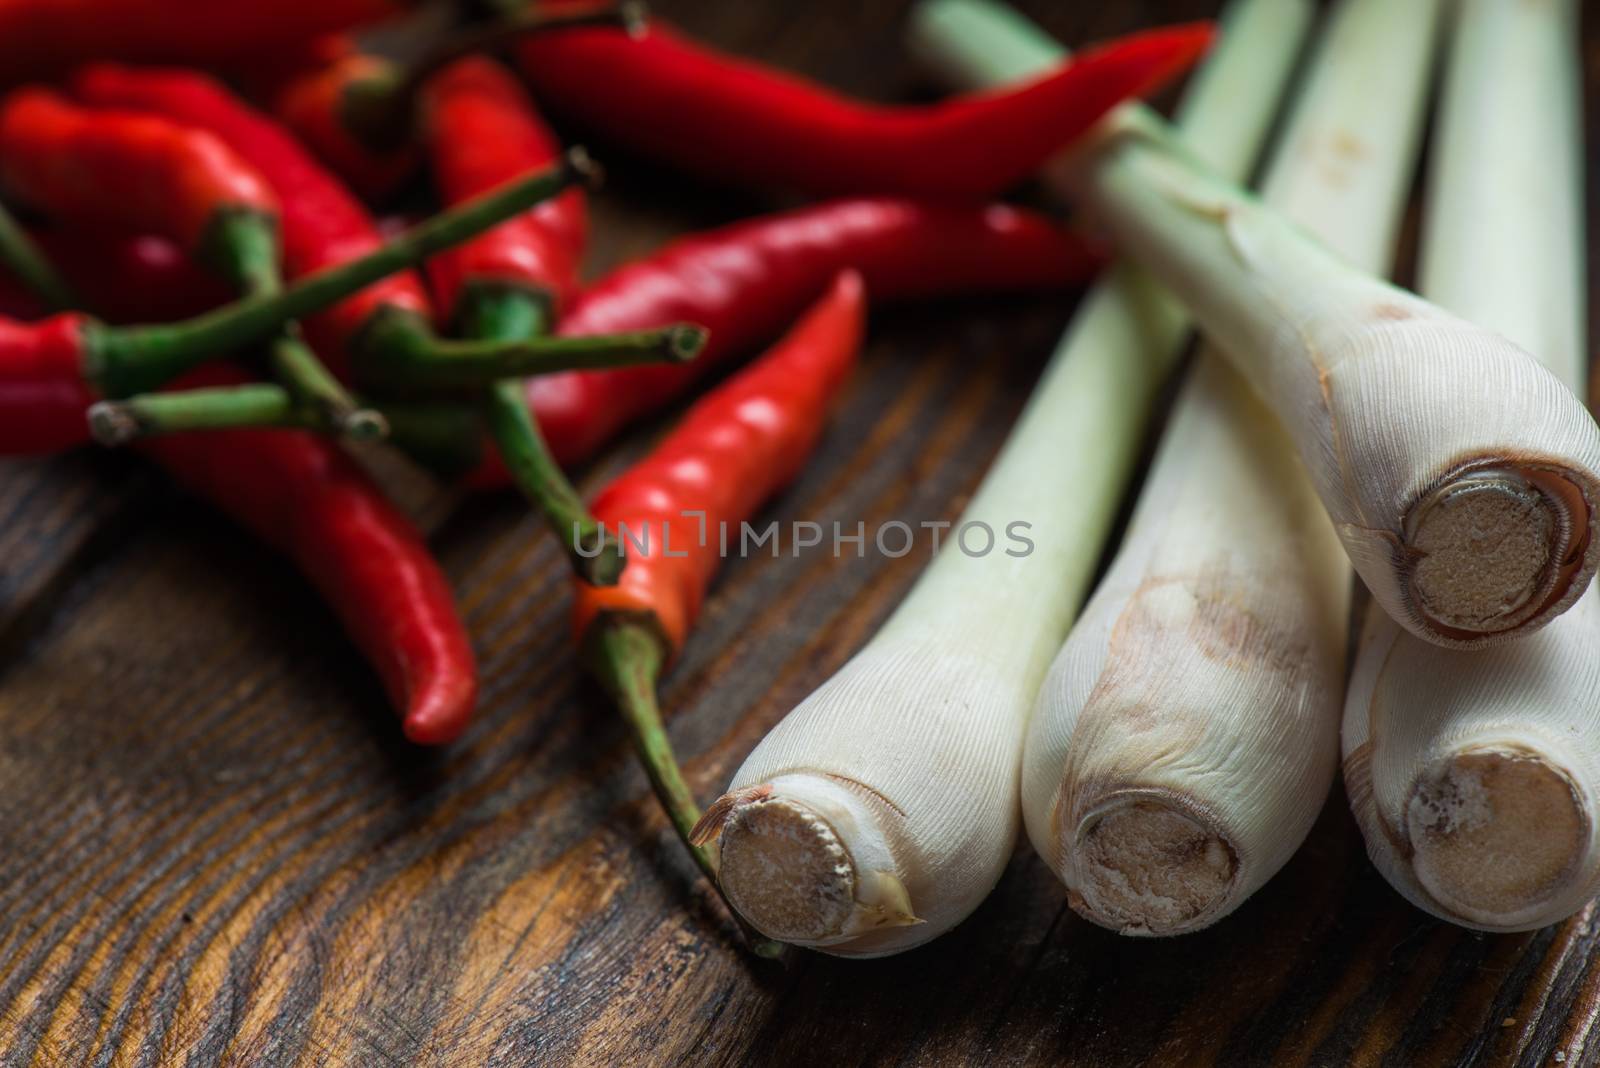 Mexican hot chili peppers with lemongrass scattered on the wooden table by Seva_blsv